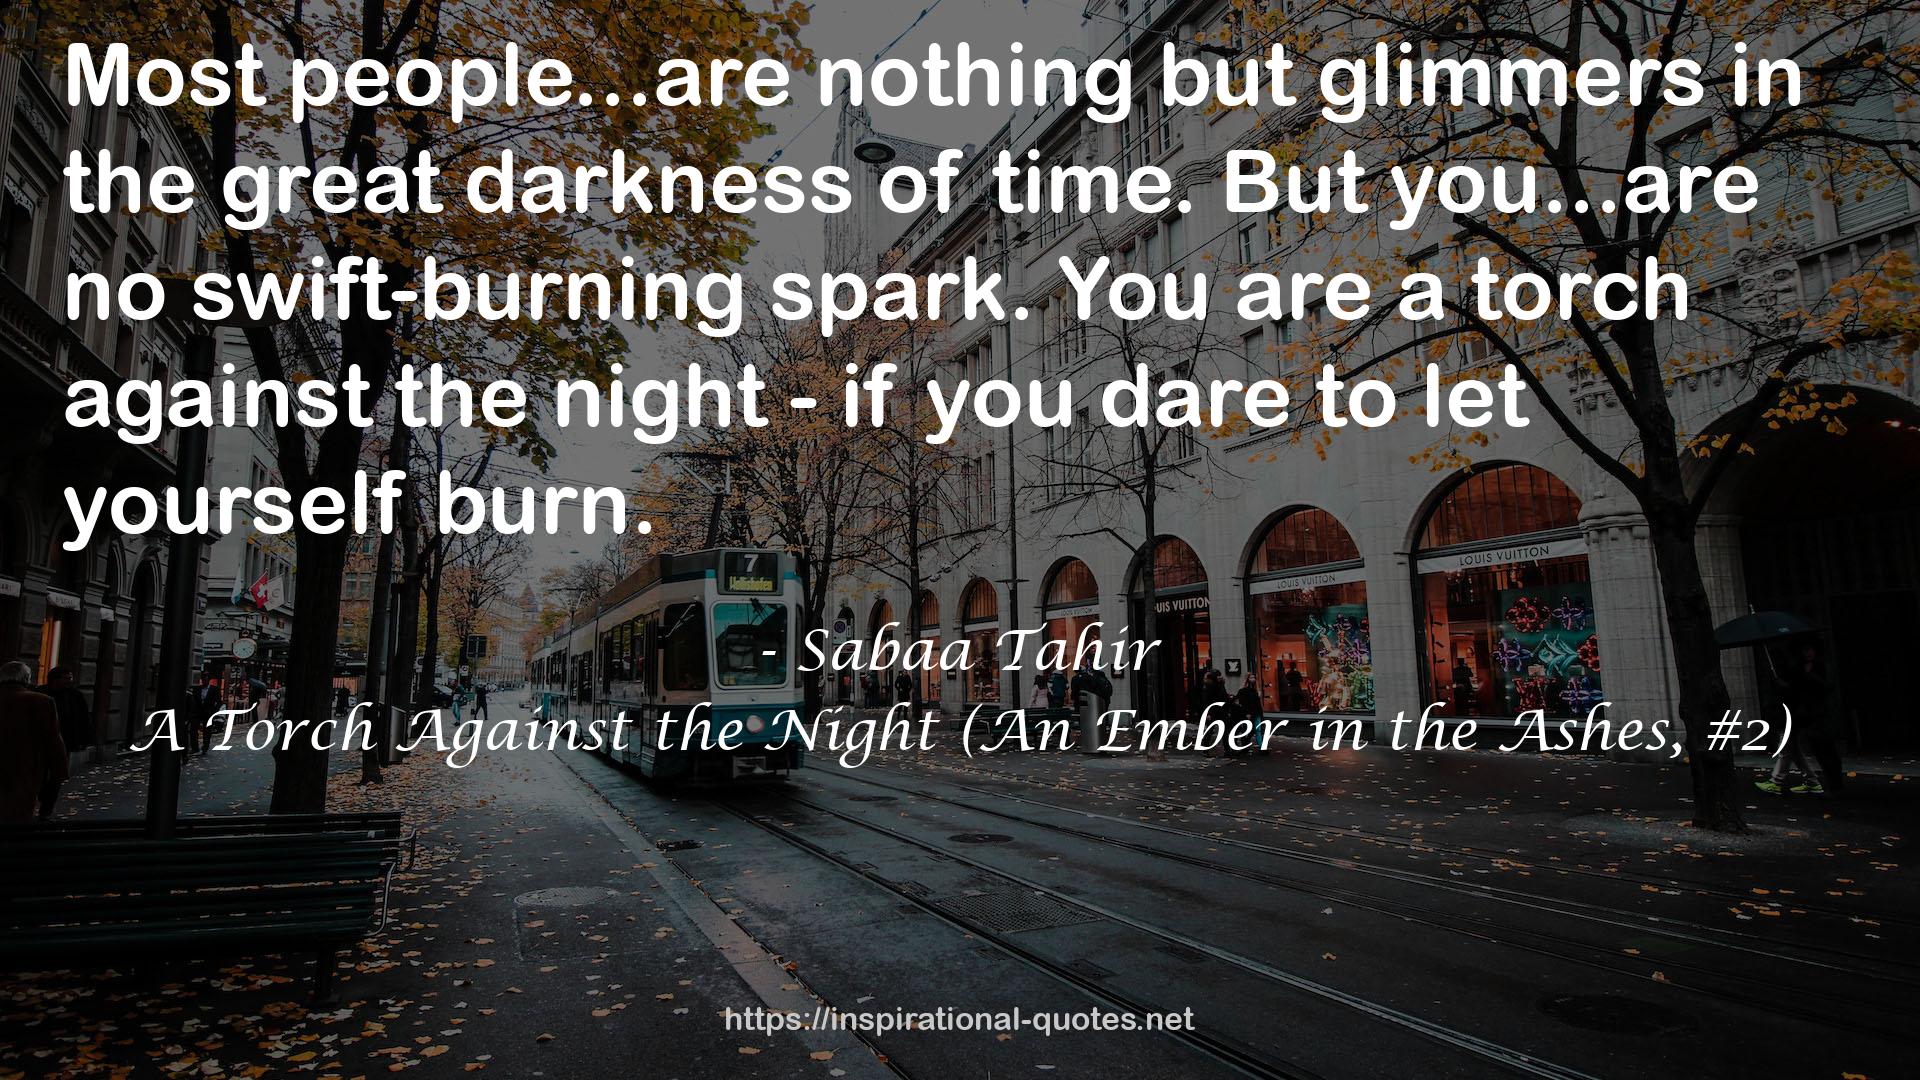 A Torch Against the Night (An Ember in the Ashes, #2) QUOTES